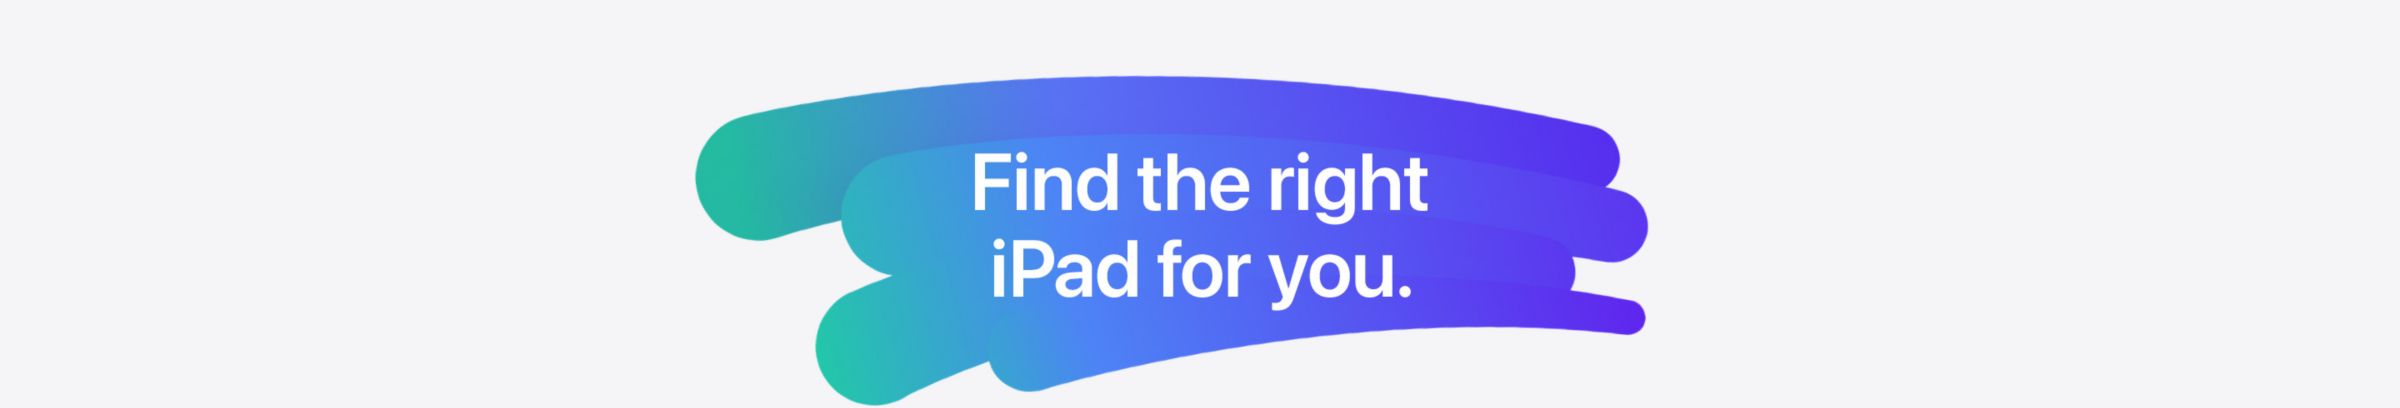 Apple Do More on iPad Find the right Ipad